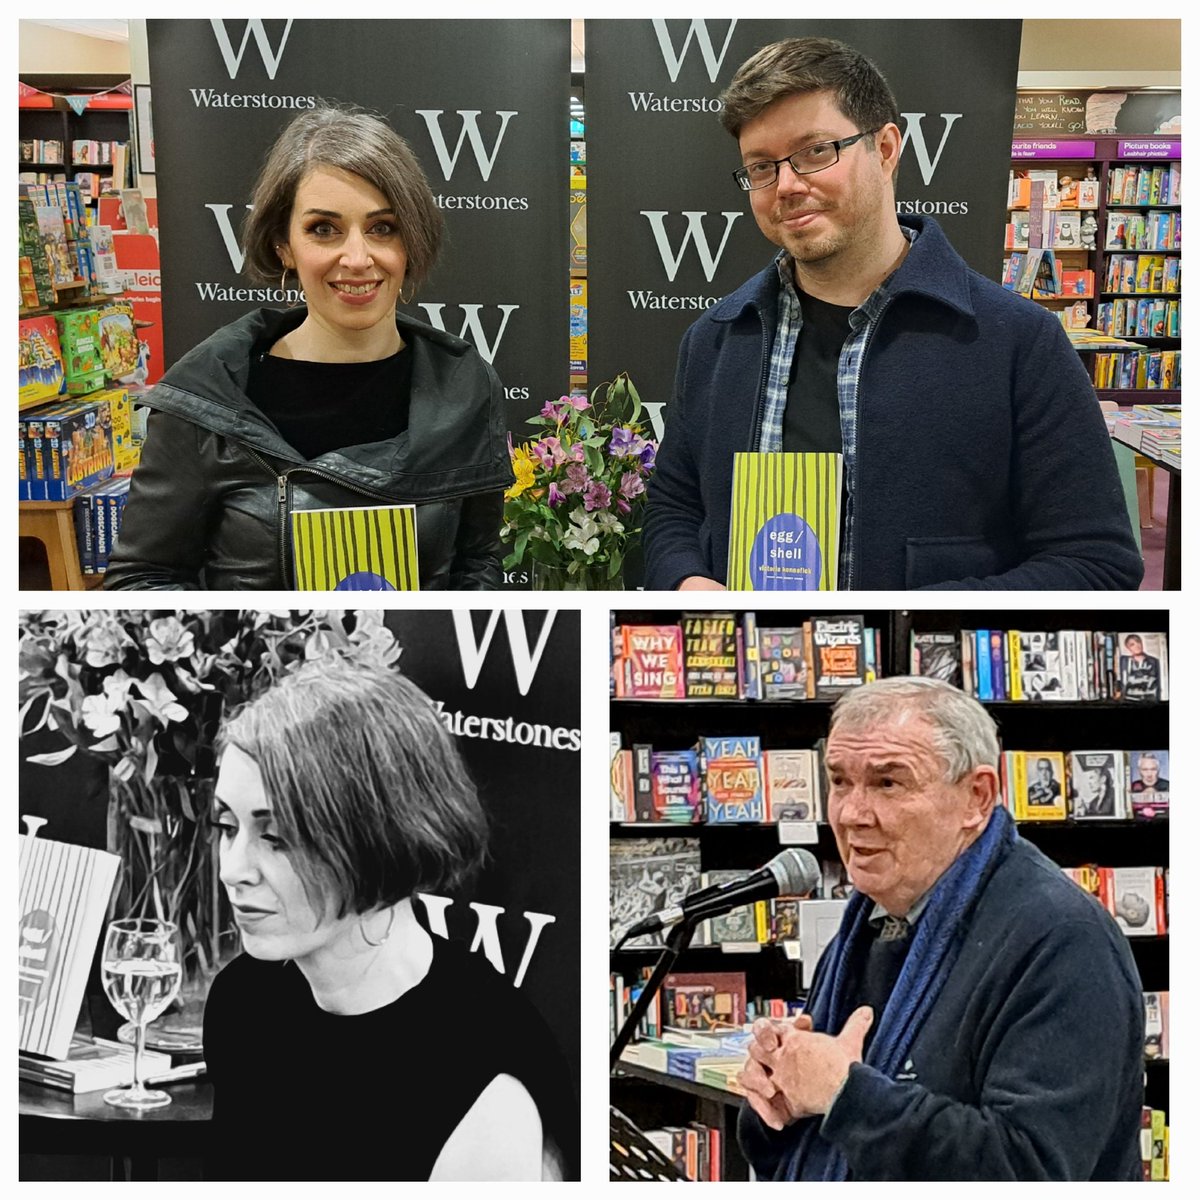 A fantastic launch this evening for Egg/Shell the brilliant new collection by poet @VKennefick. Thanks to Thomas McCarthy for a typically eloquent and incisive speech and interview. @Carcanet @EnglishUCC @corkcolibrary @corkcitylibrary @echolivecork #cork #waterstones